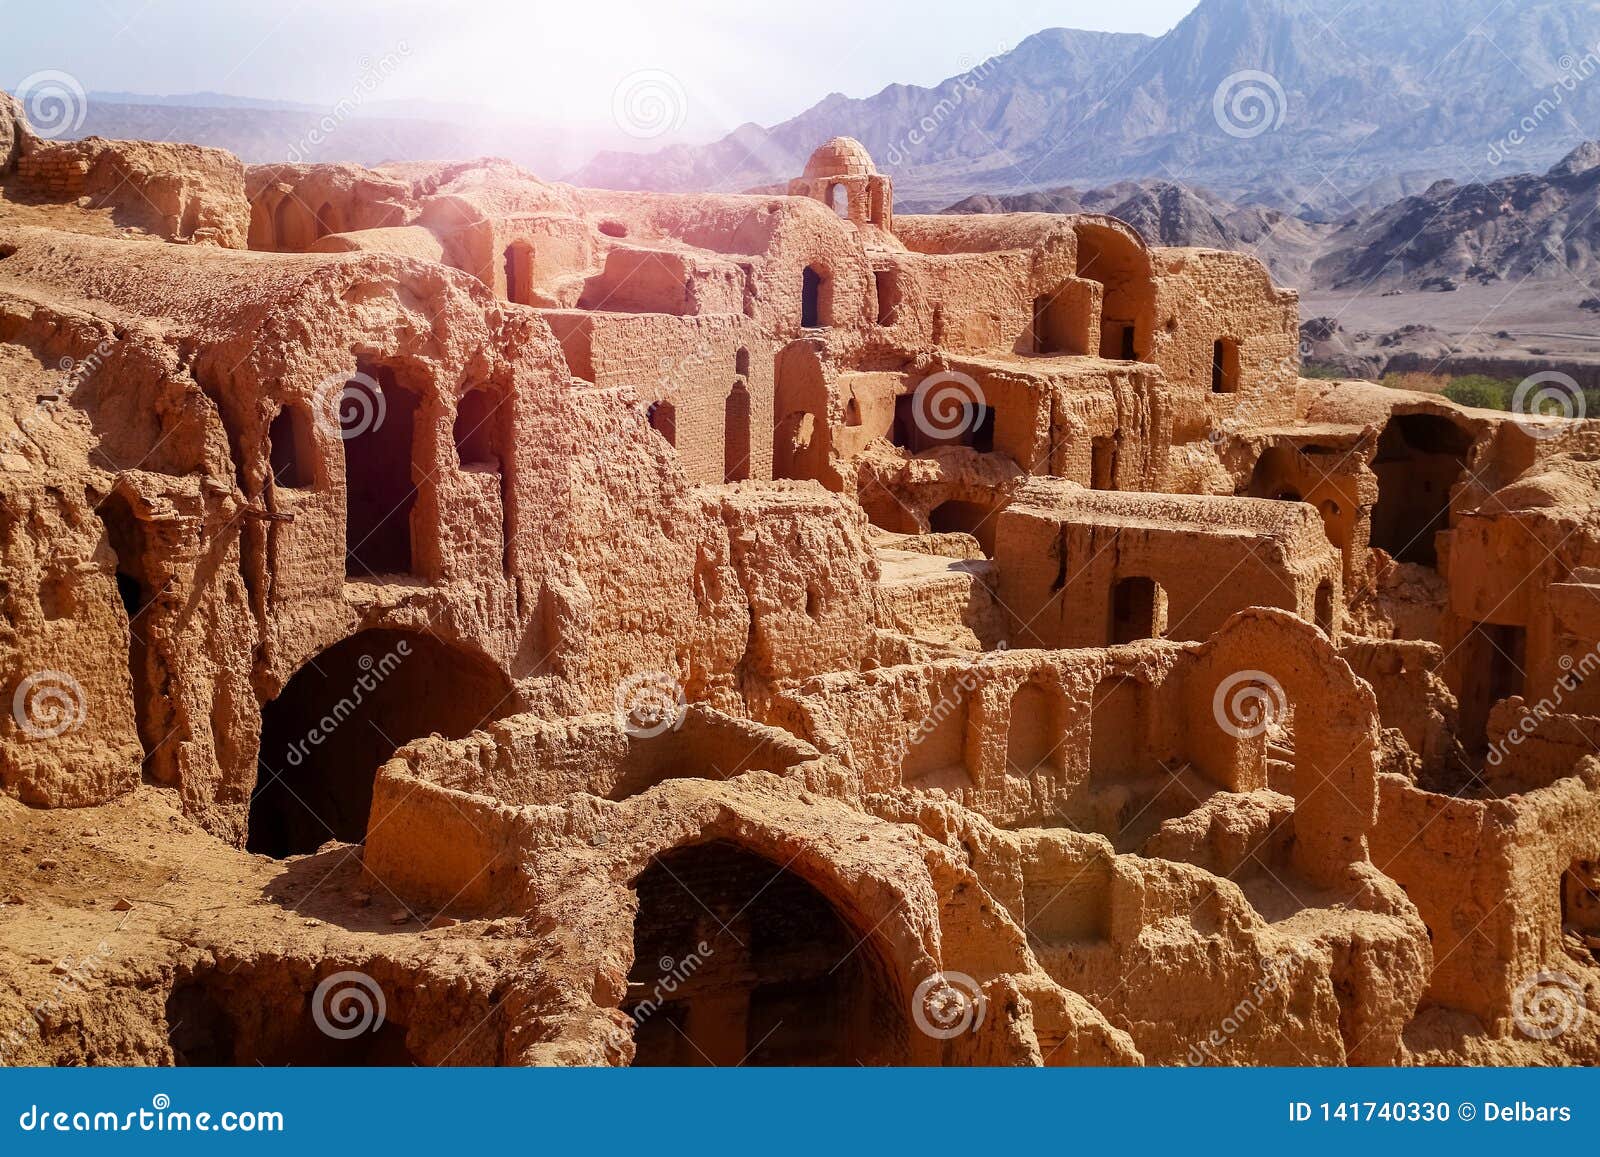 ancient clay architecture in the abandoned village of kharanagh. persia. iran. sights yazd.